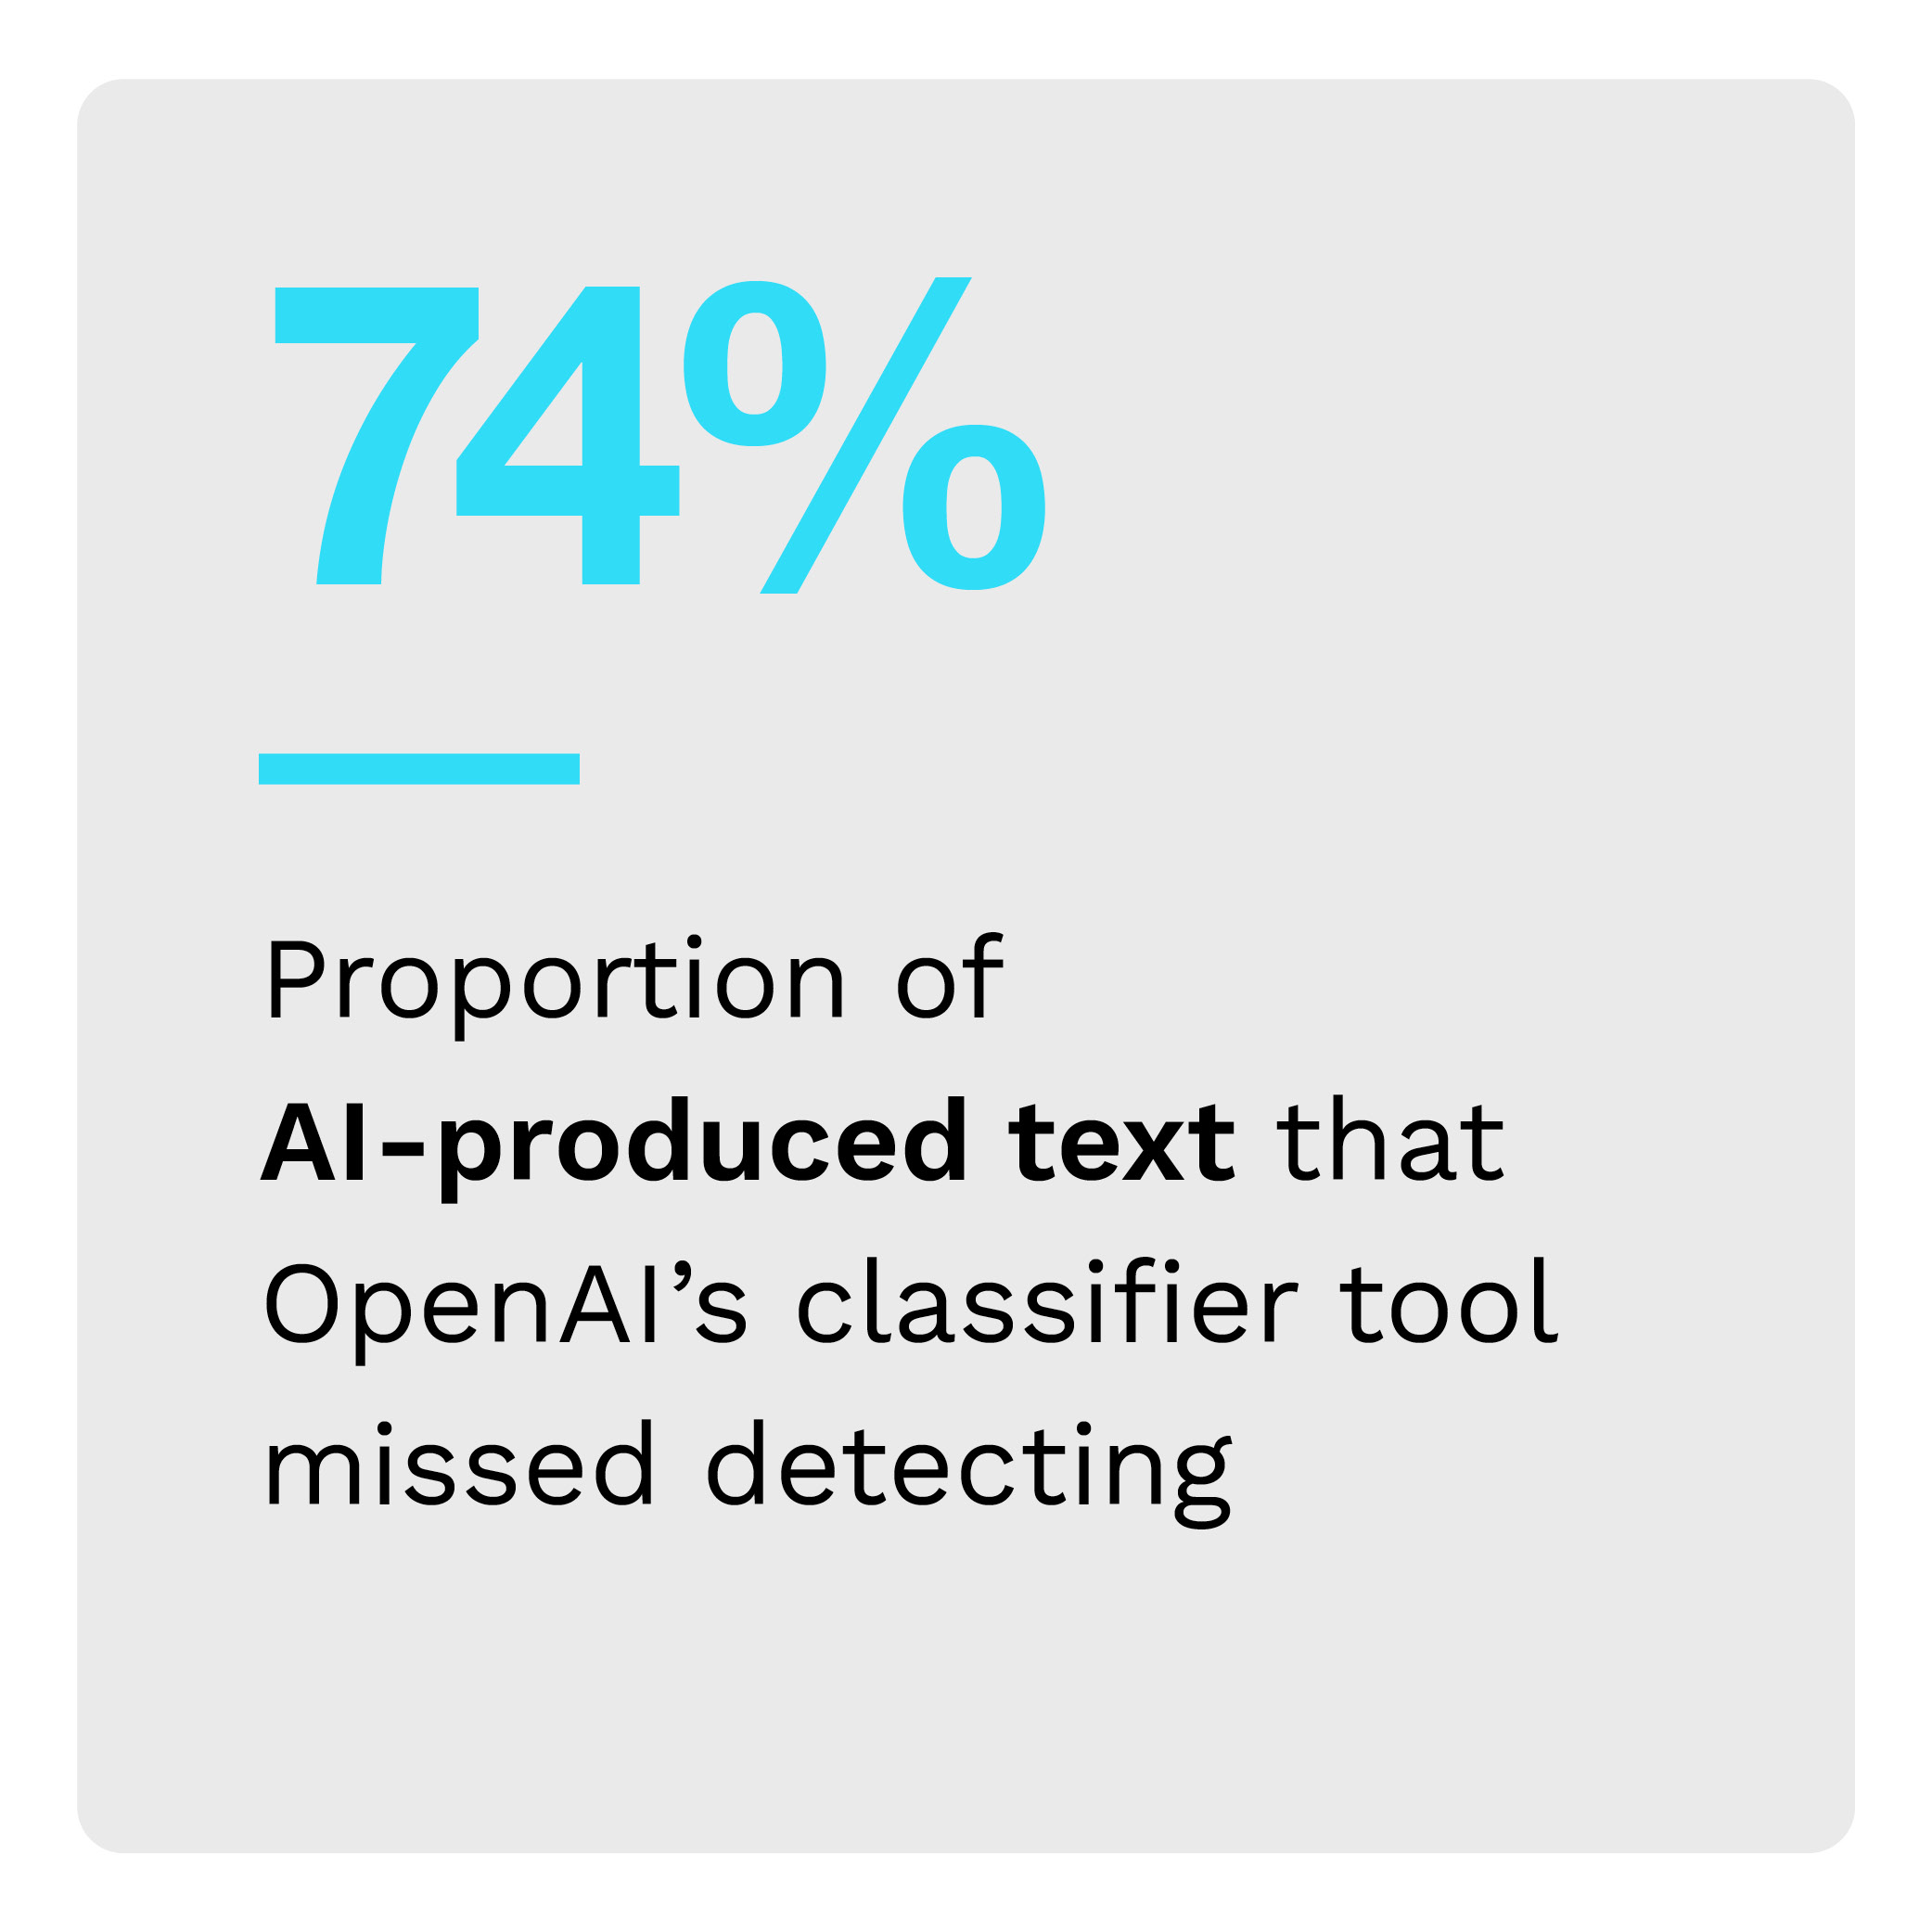 74%: Proportion of Al-produced text that OpenAl's classifier tool missed detecting